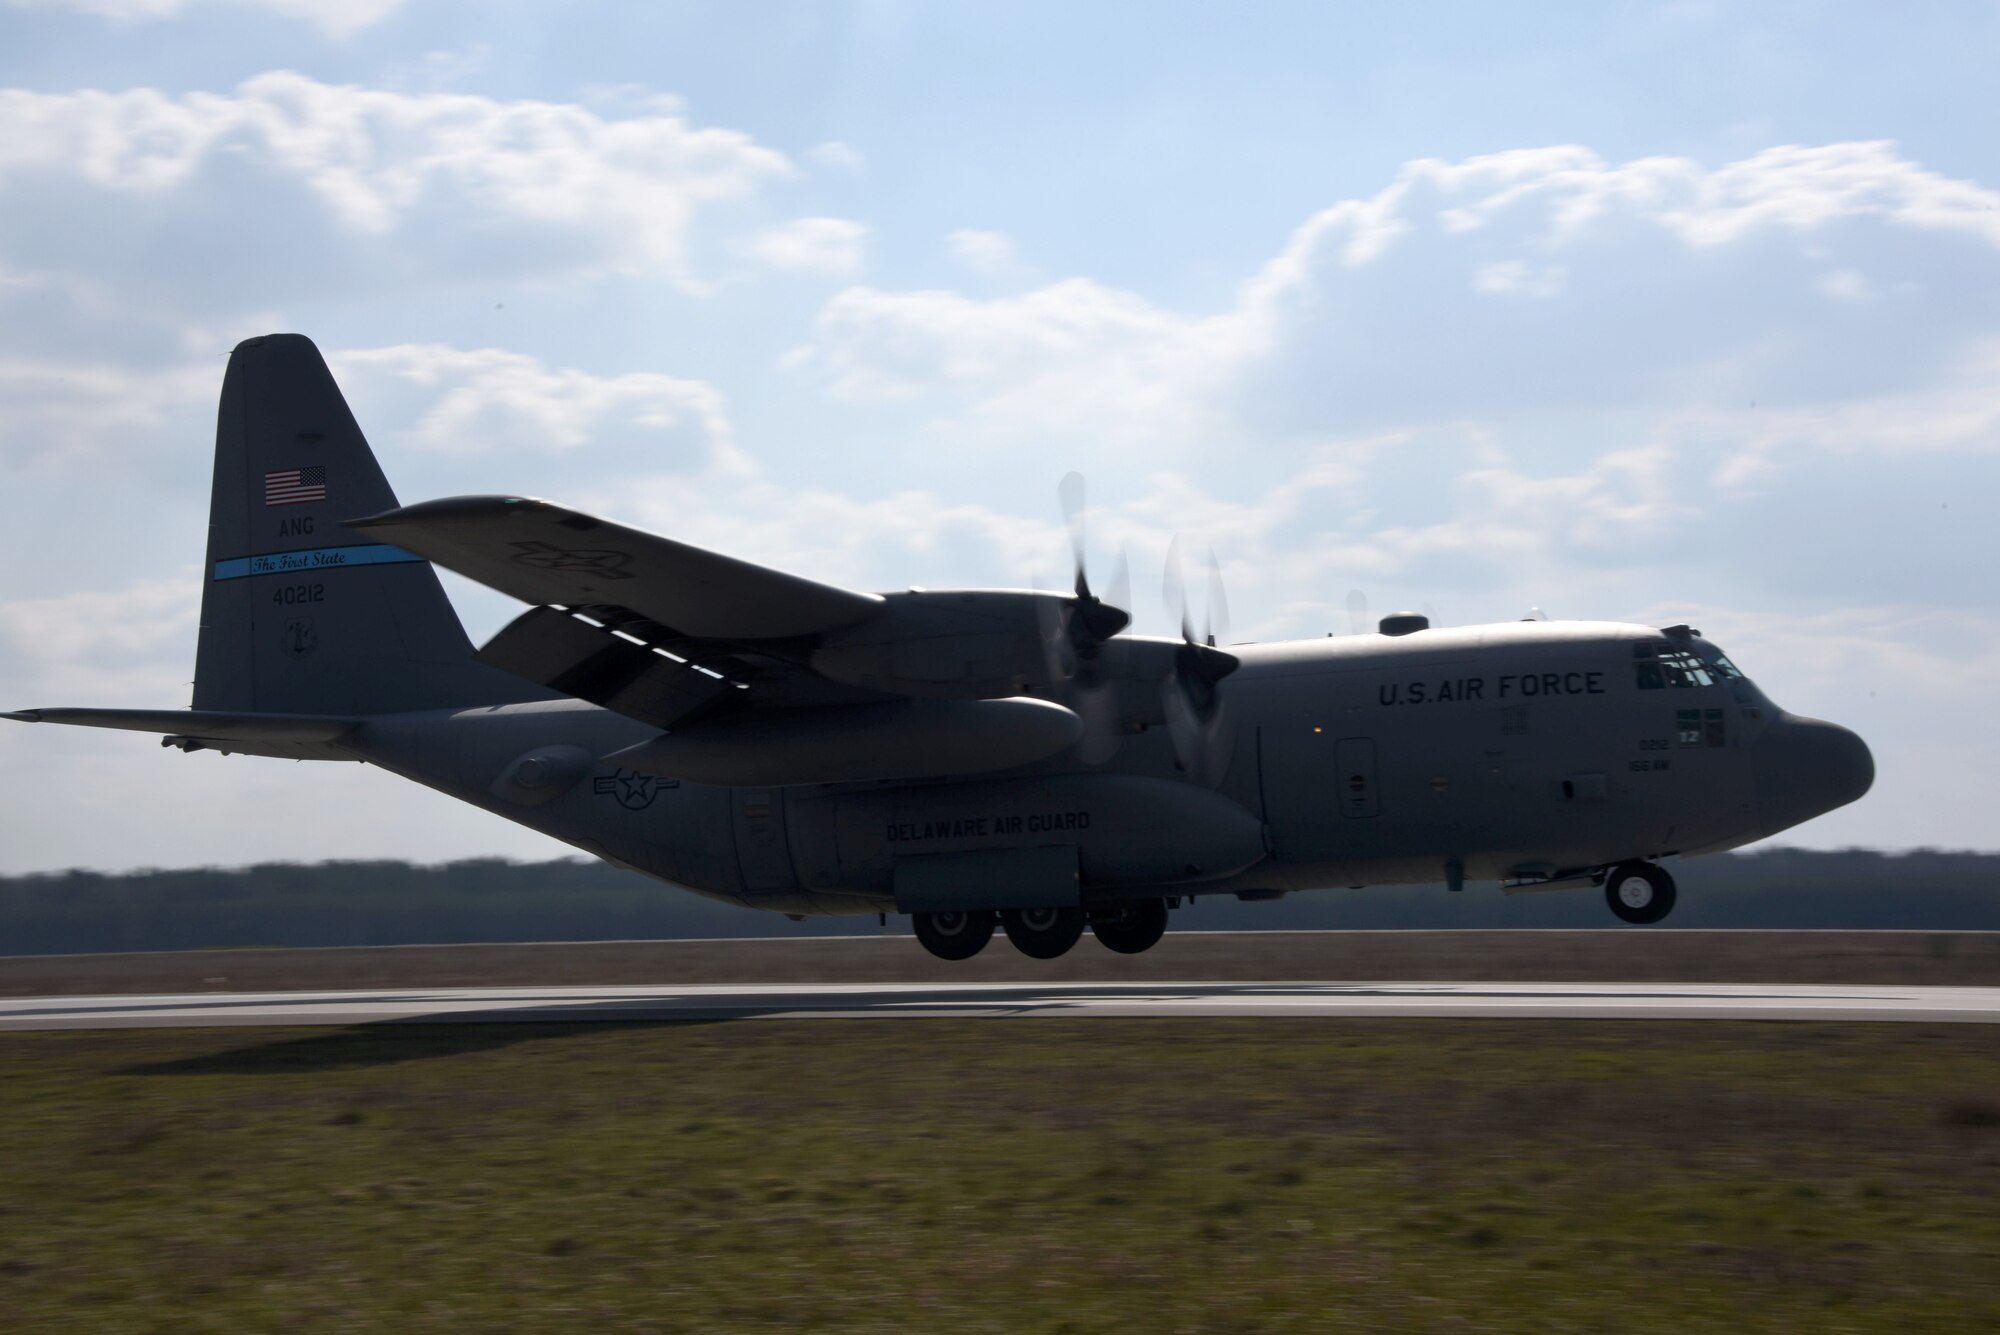 A U.S. C-130 Hercules conducts a tactical landing at Powidz Air Base, Poland, March 24, 2017.  Airmen from the U.S. and Poland participated in bilateral training during Aviation Detachment 17-2 in support of Operation Atlantic Resolve.  These bilateral trainings focused on maintaining joint readiness while building interoperability.  (Air National Guard photo by Staff Sgt. Alonzo Chapman/Released).